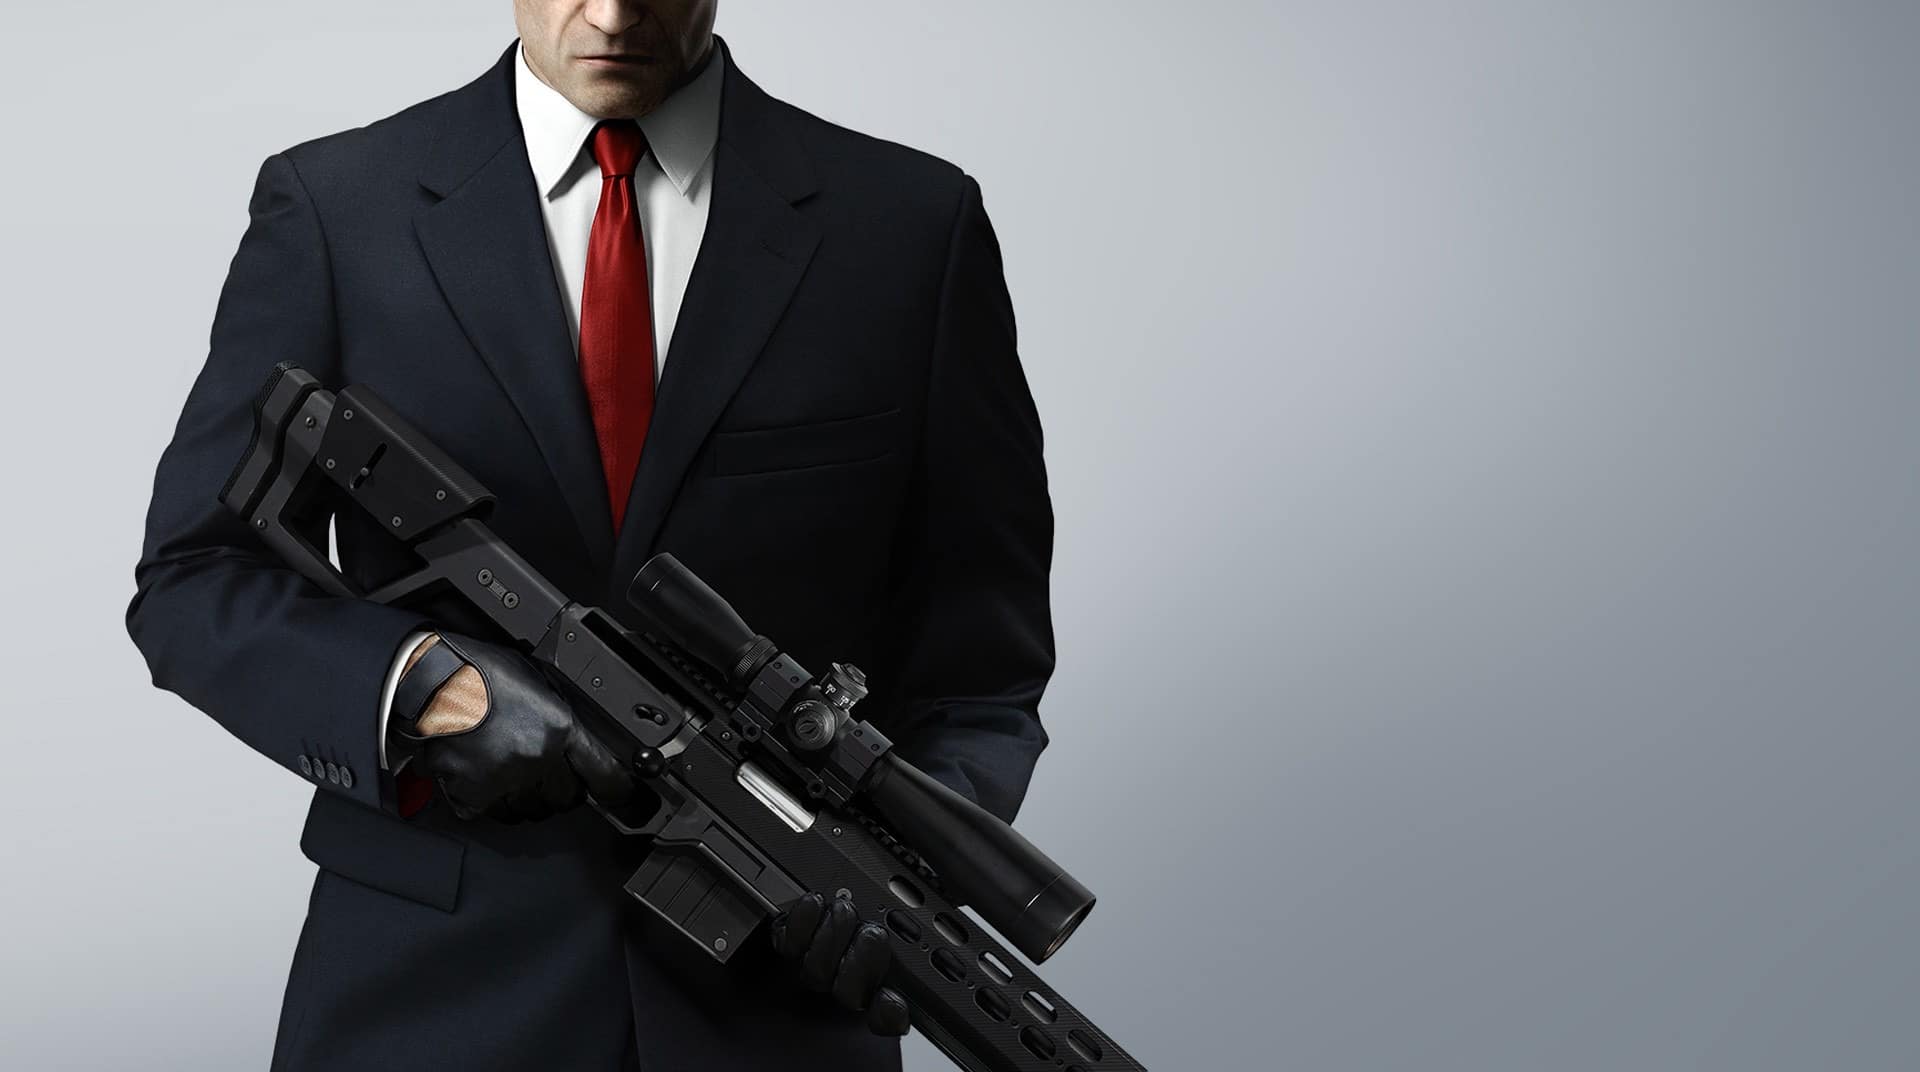 download hitman sniper android